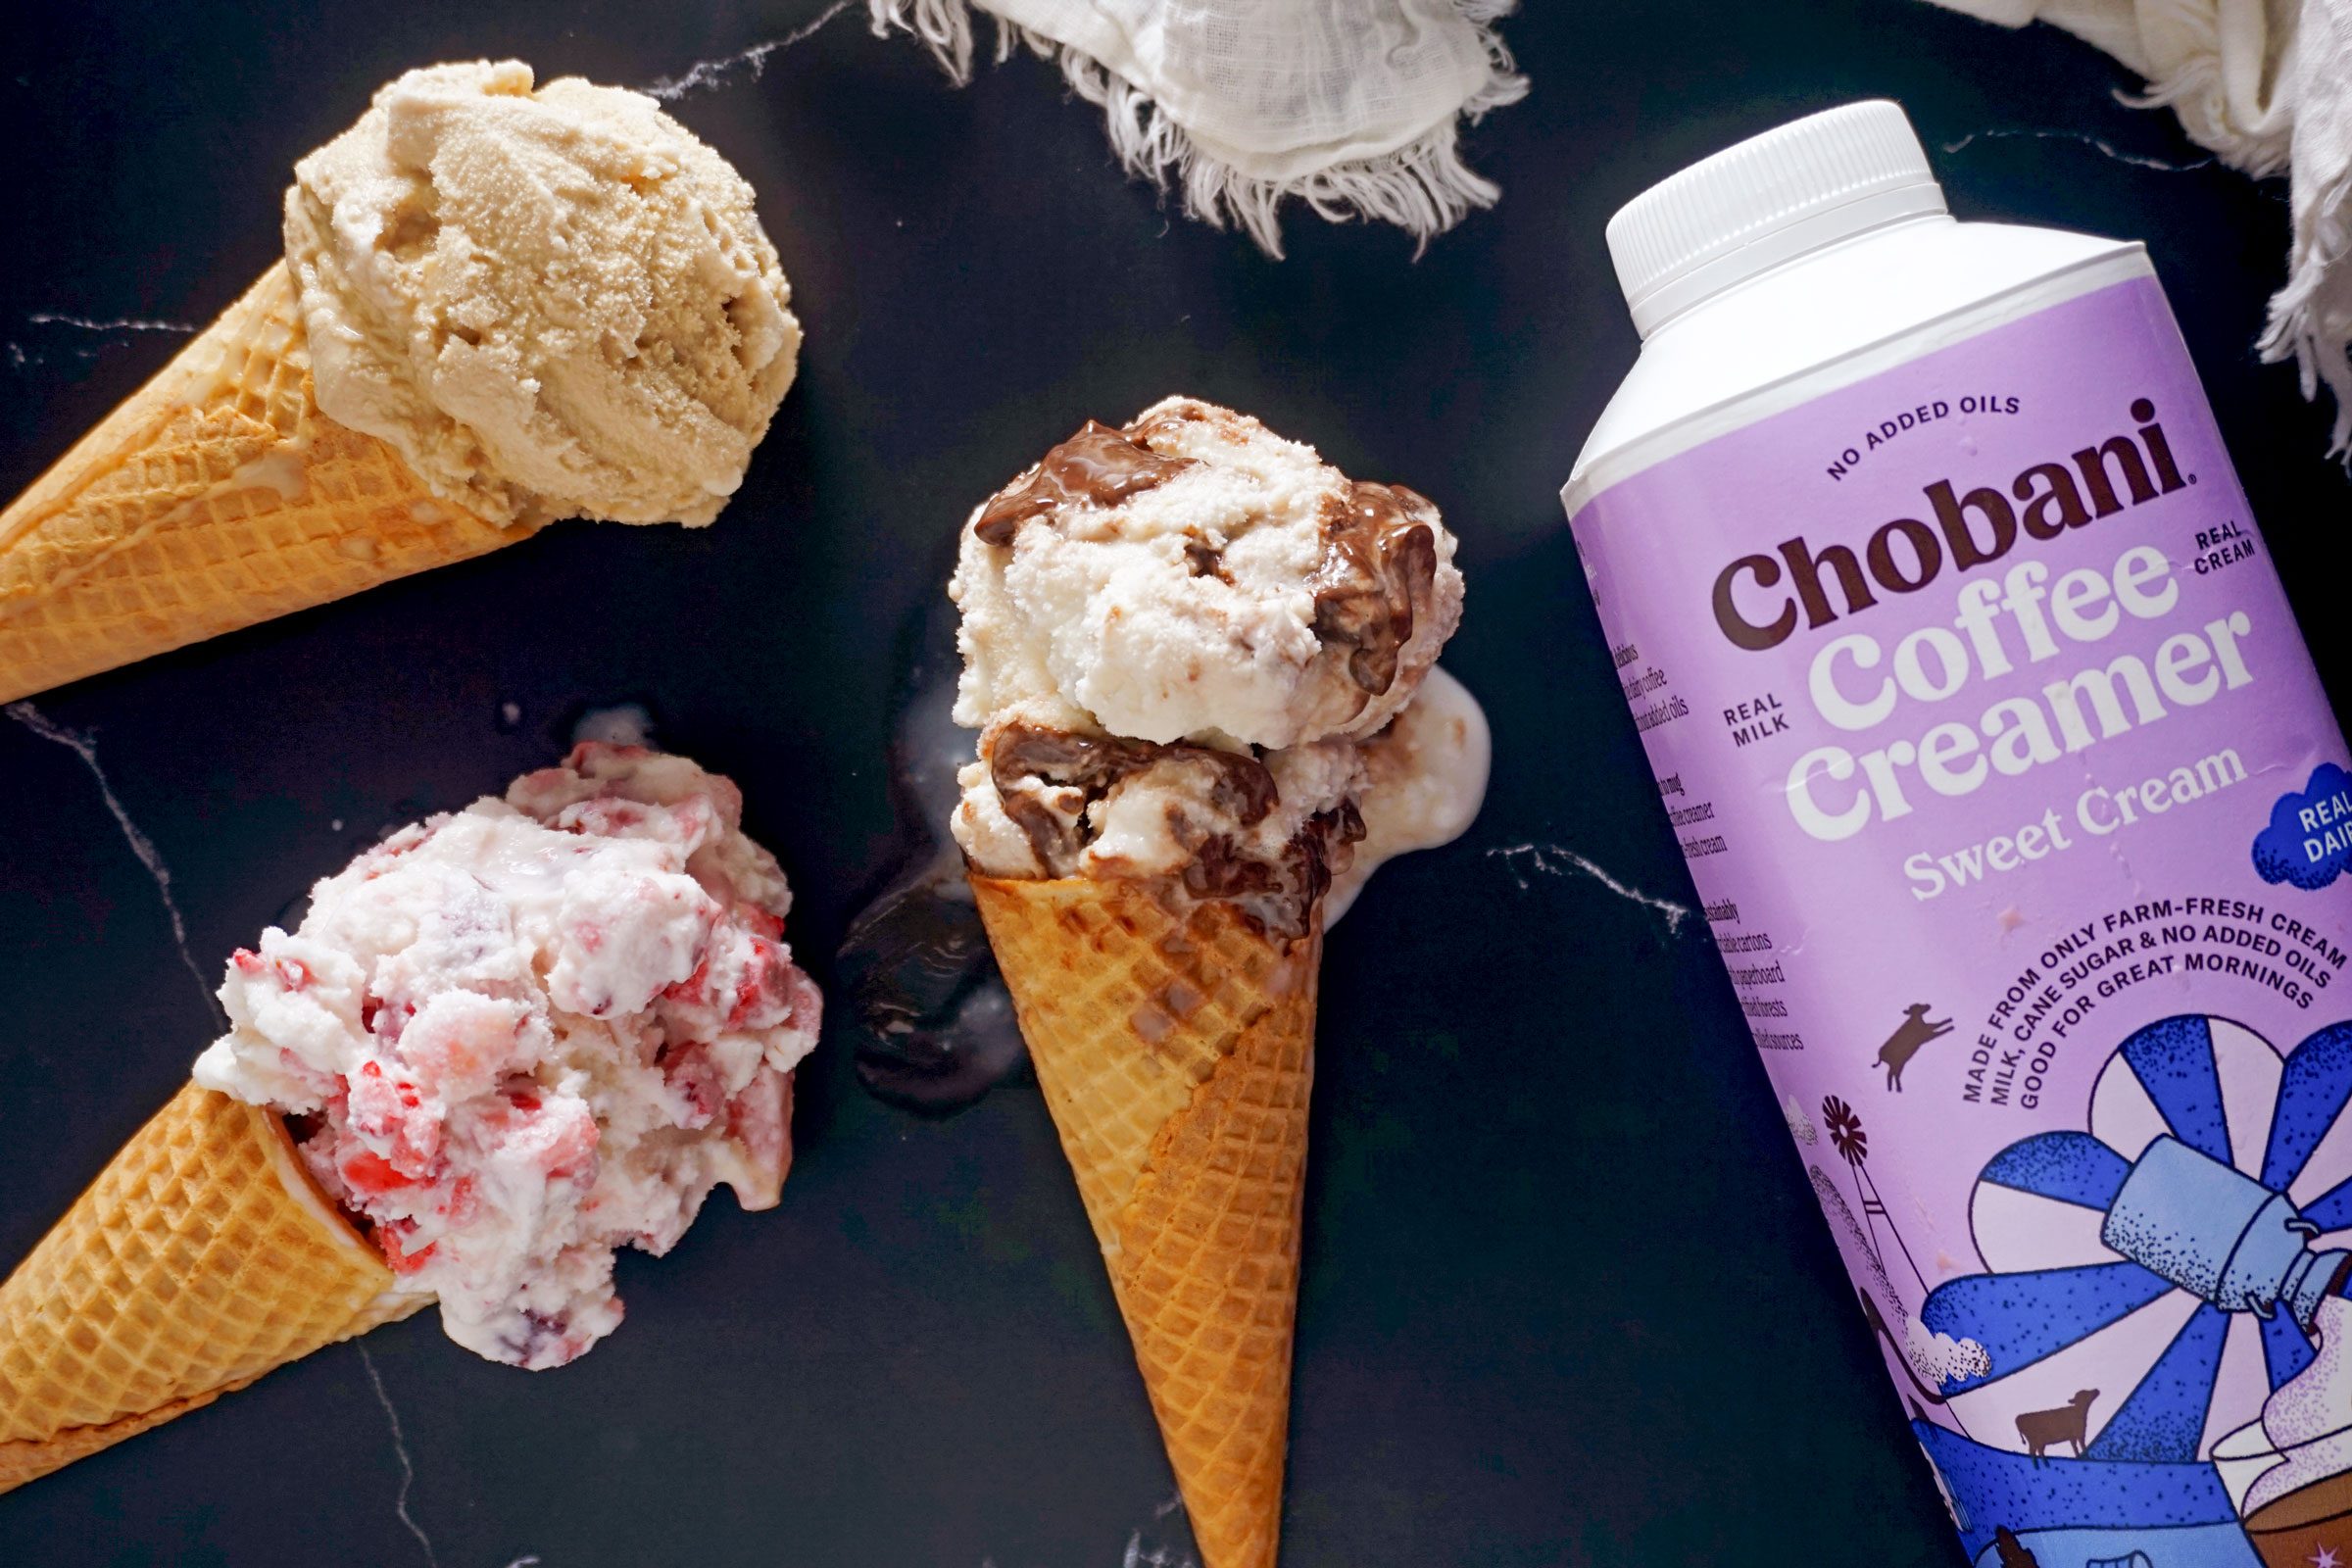  People Are Making Ice Cream with Coffee Creamer—Heres the Simple Recipe